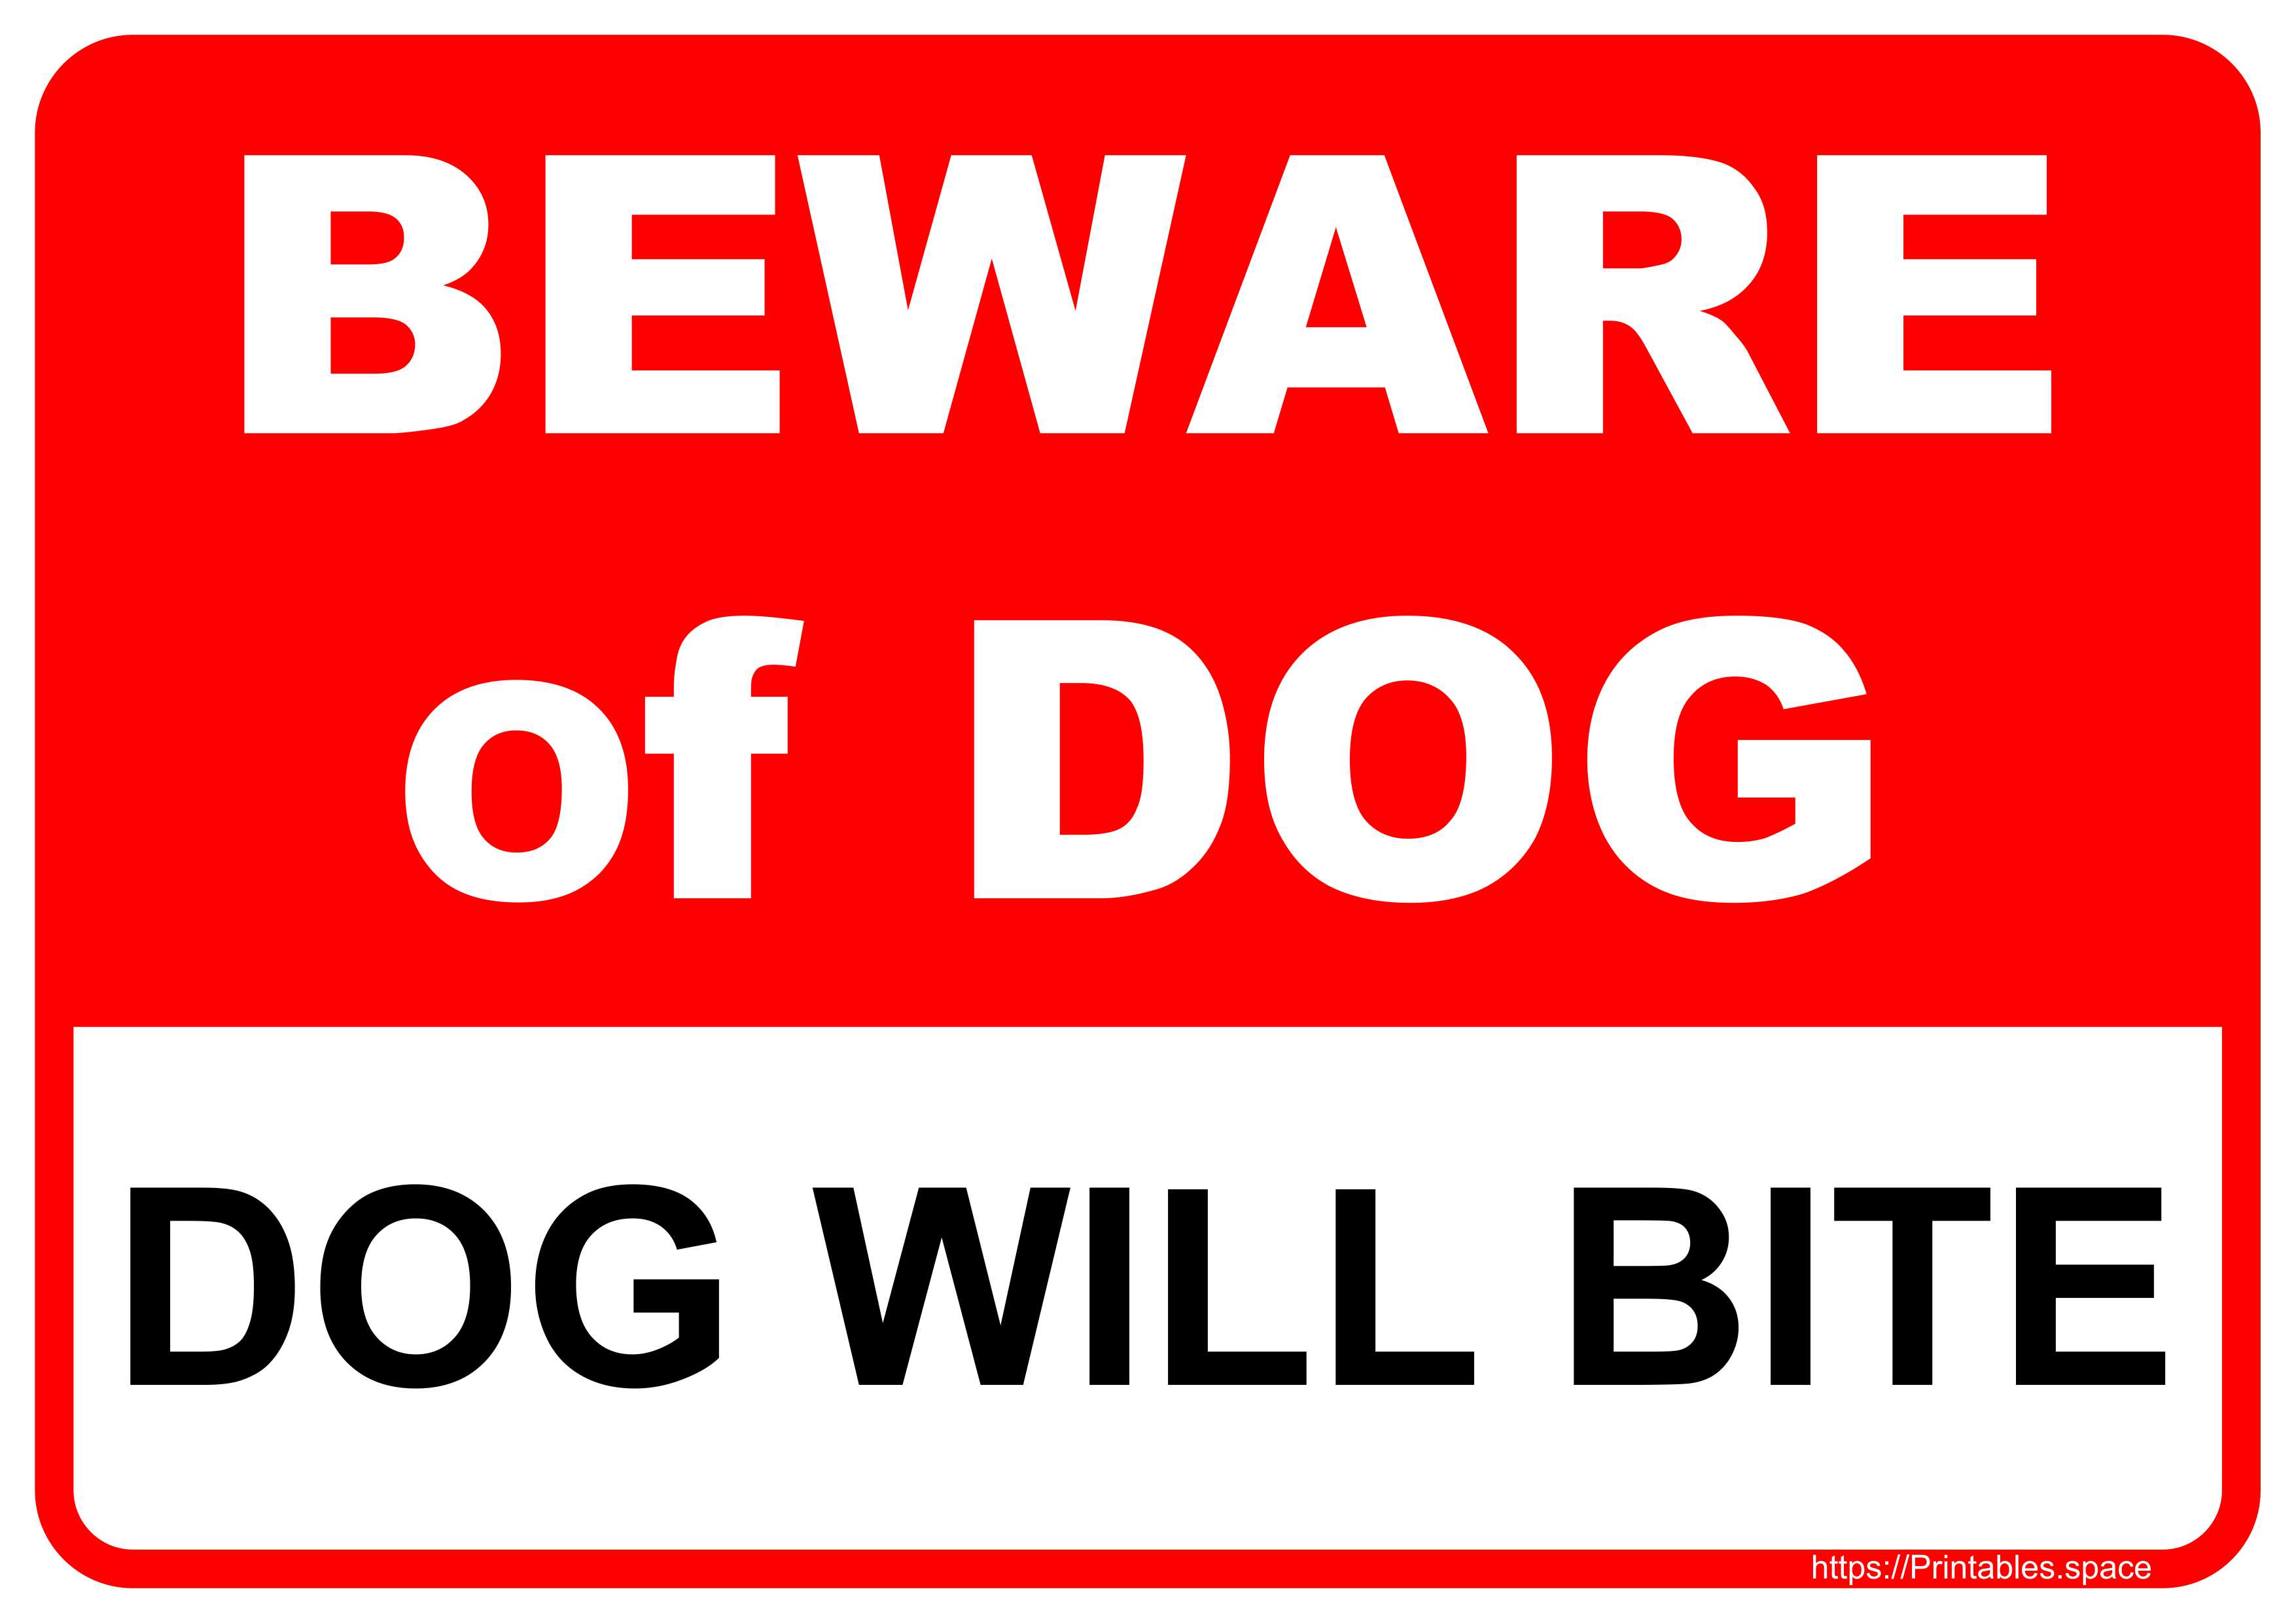 beware-of-dog-dog-will-bite-sign-free-printables